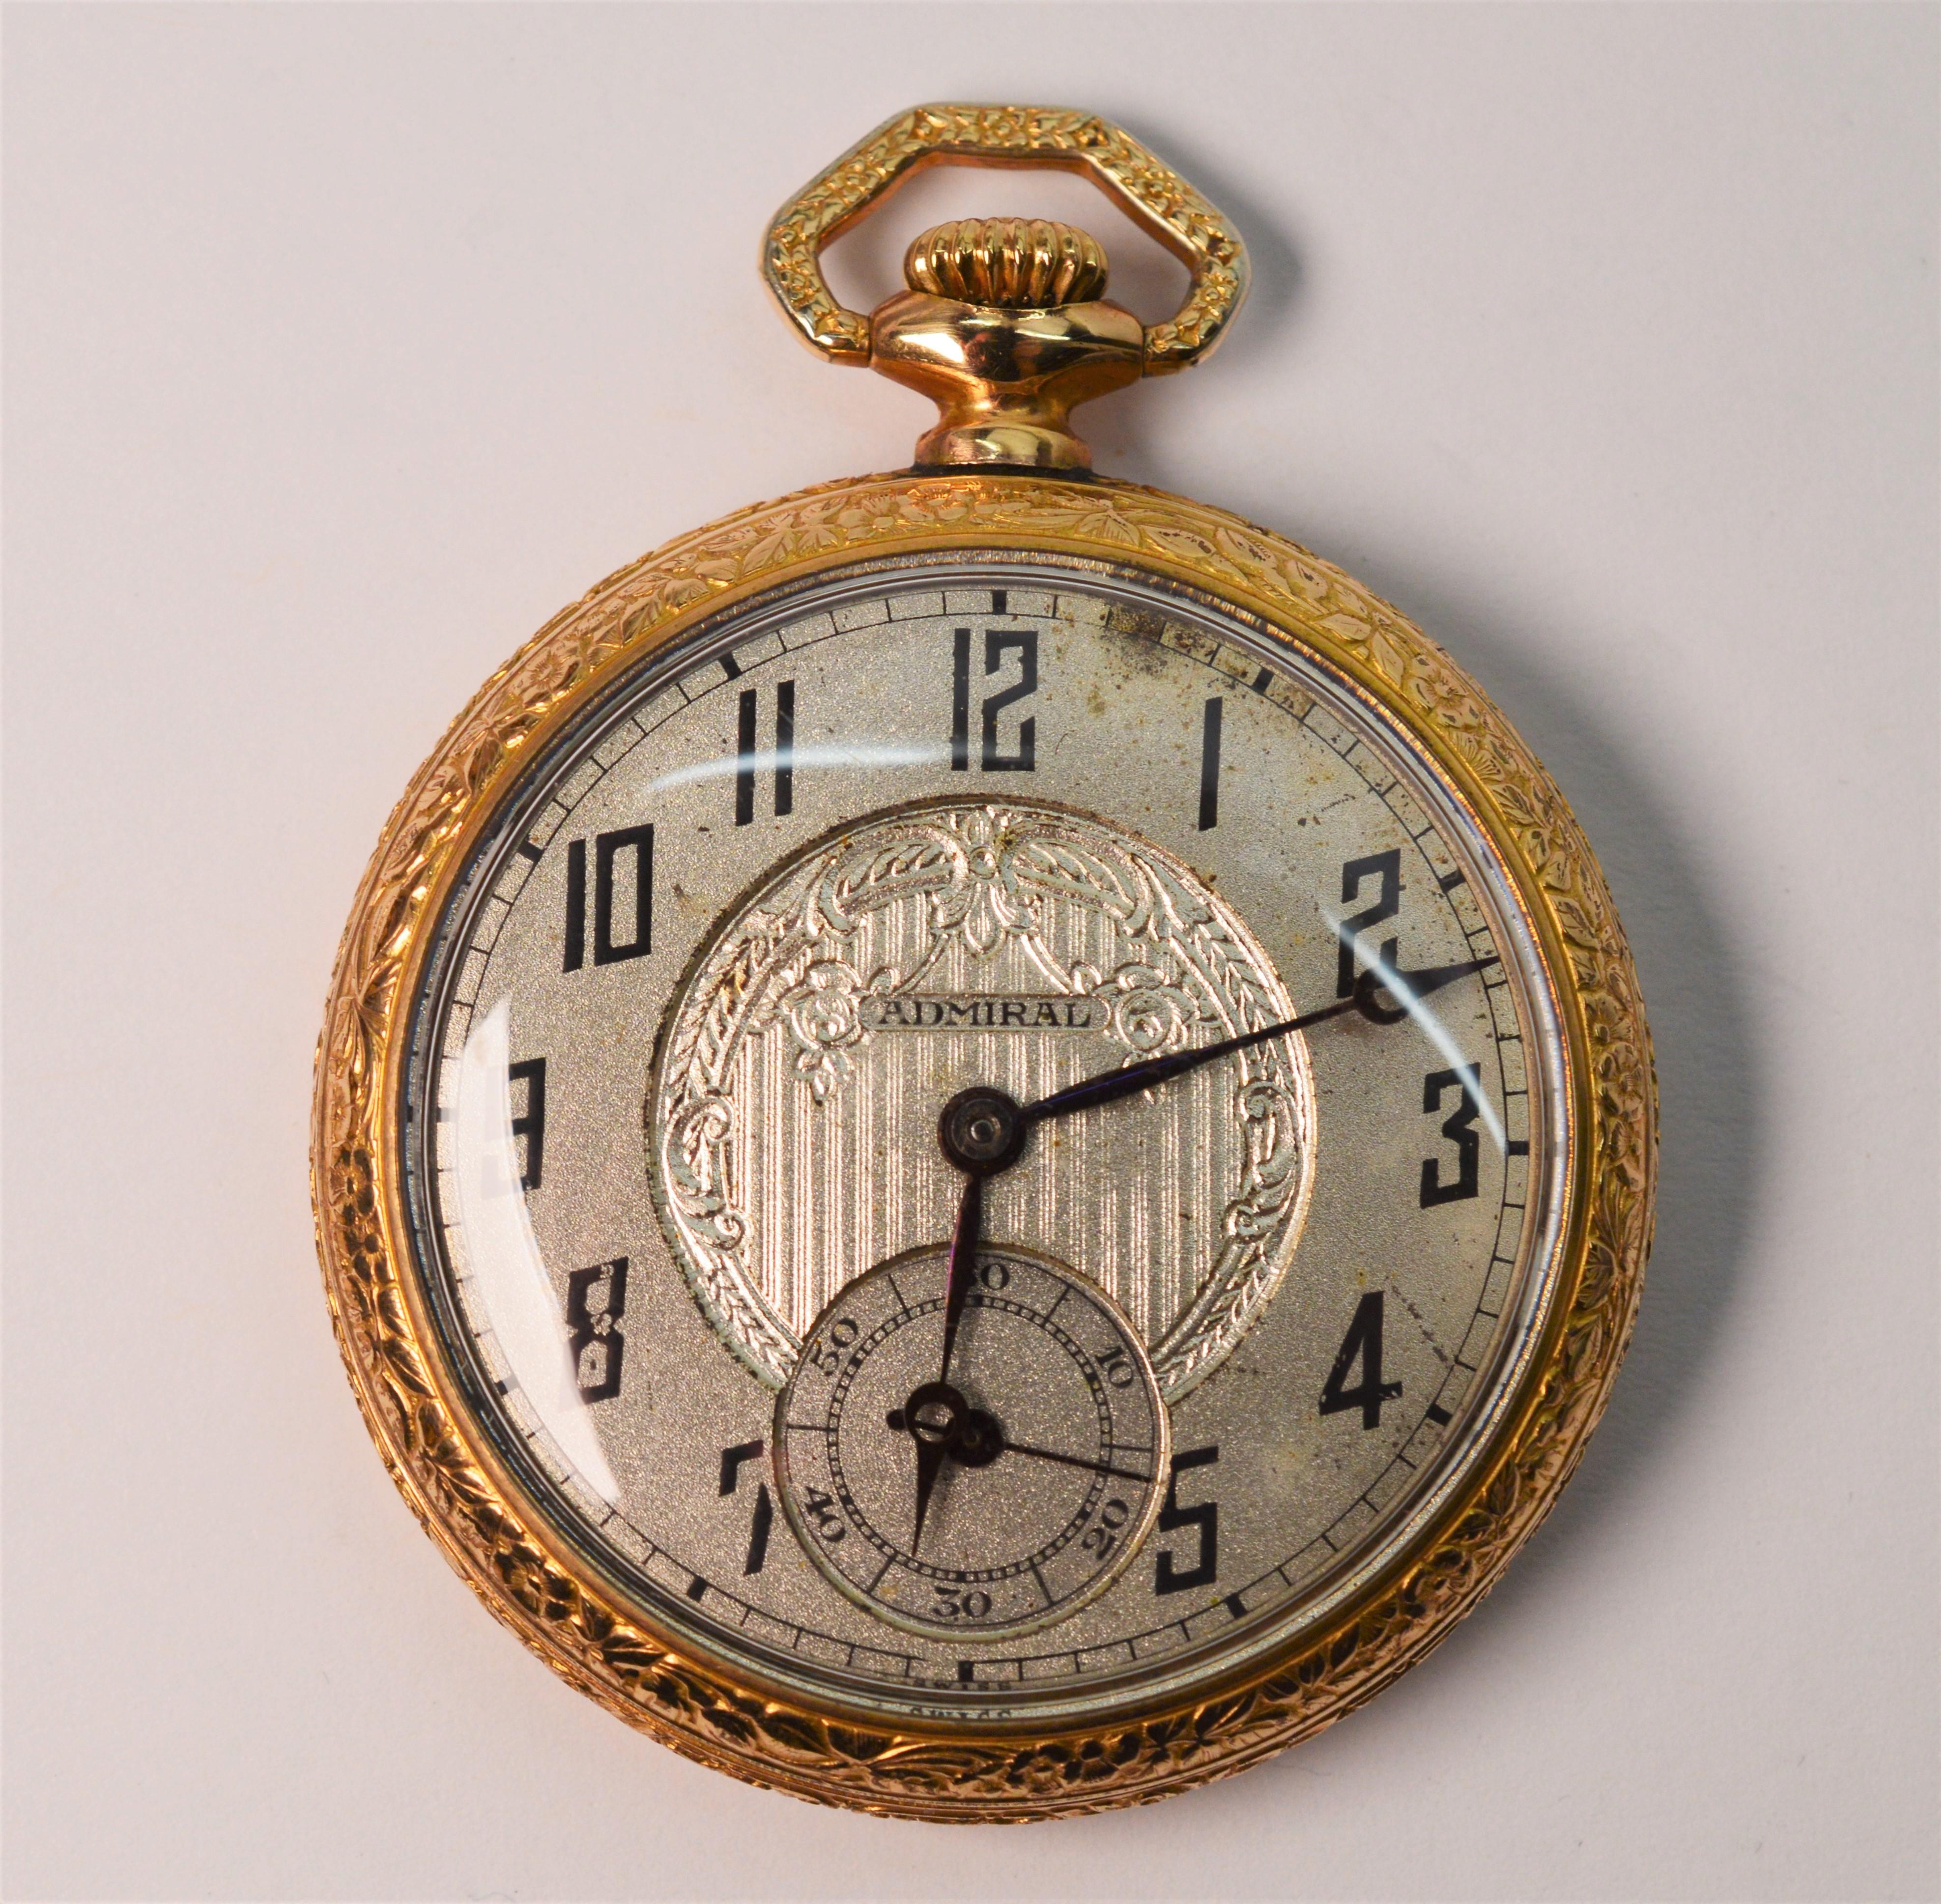 Enjoy the view into the inner workings of this circa 1920 antique gold filled Tacy Watch Company Admiral pocket watch with skeleton display back. In watch size 45mm (measuring 1-3/4 inches), this admiral has a silver toned face with fancy decorative